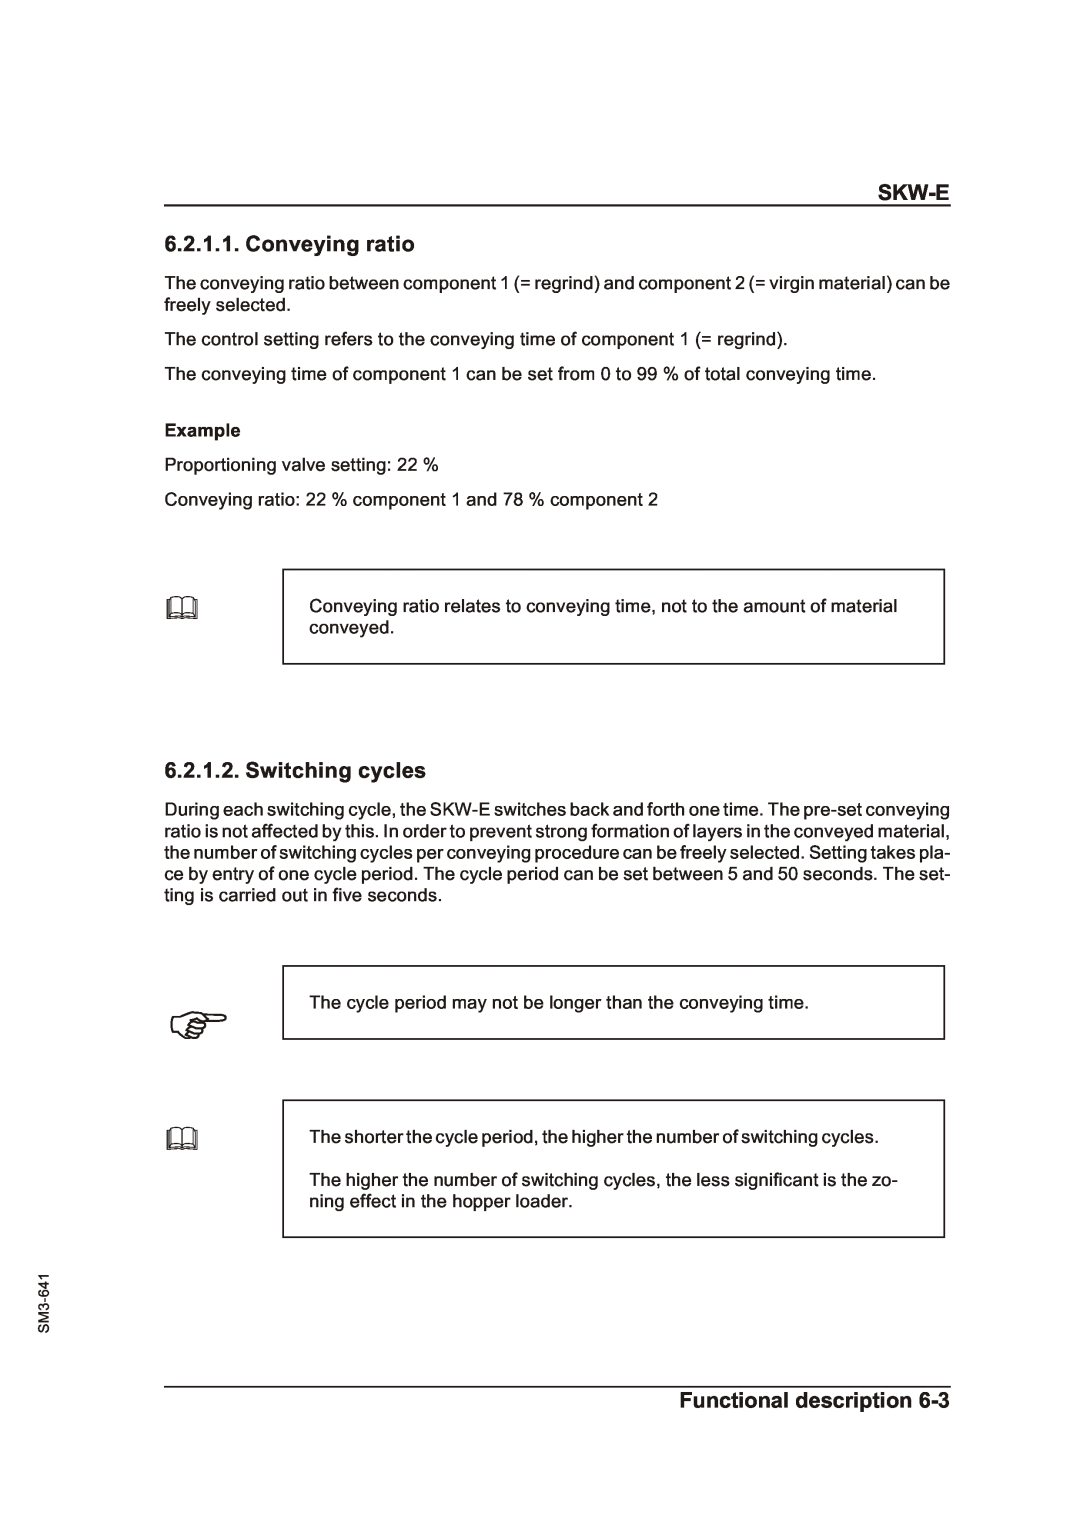 Sterling Plumbing manual SKW-E 6.2.1.1. Conveying ratio, Switching cycles, Functional description 